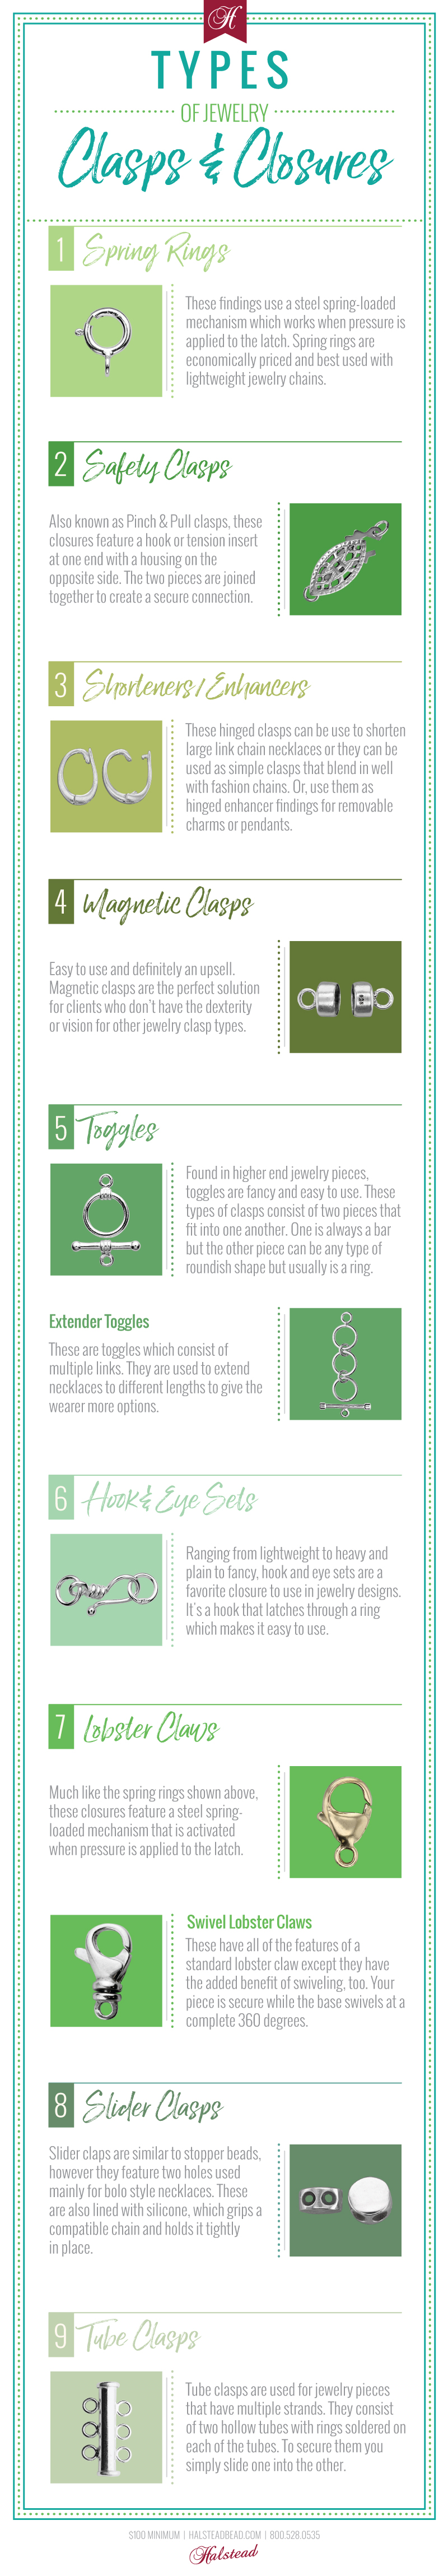 Infograph: Types of Clasps & Closures